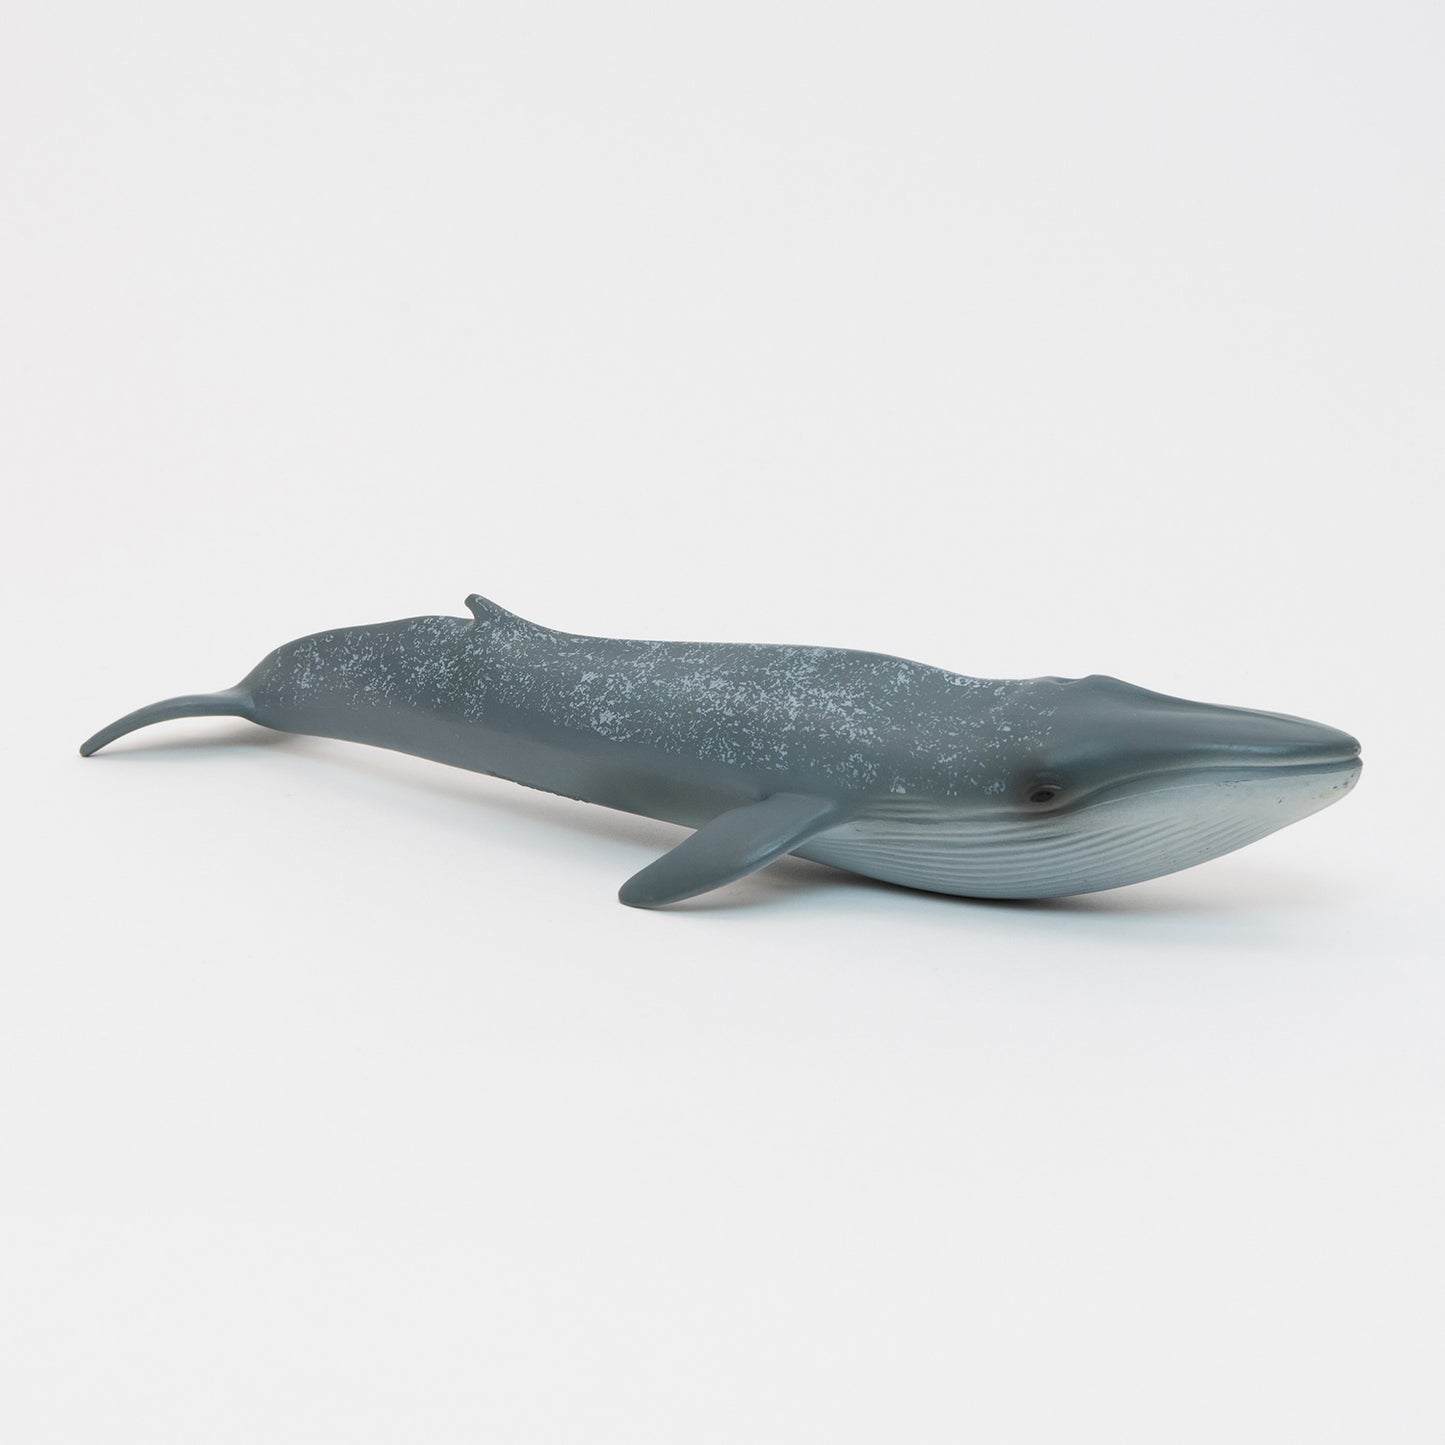 A blue whale plastic toy on a white background.